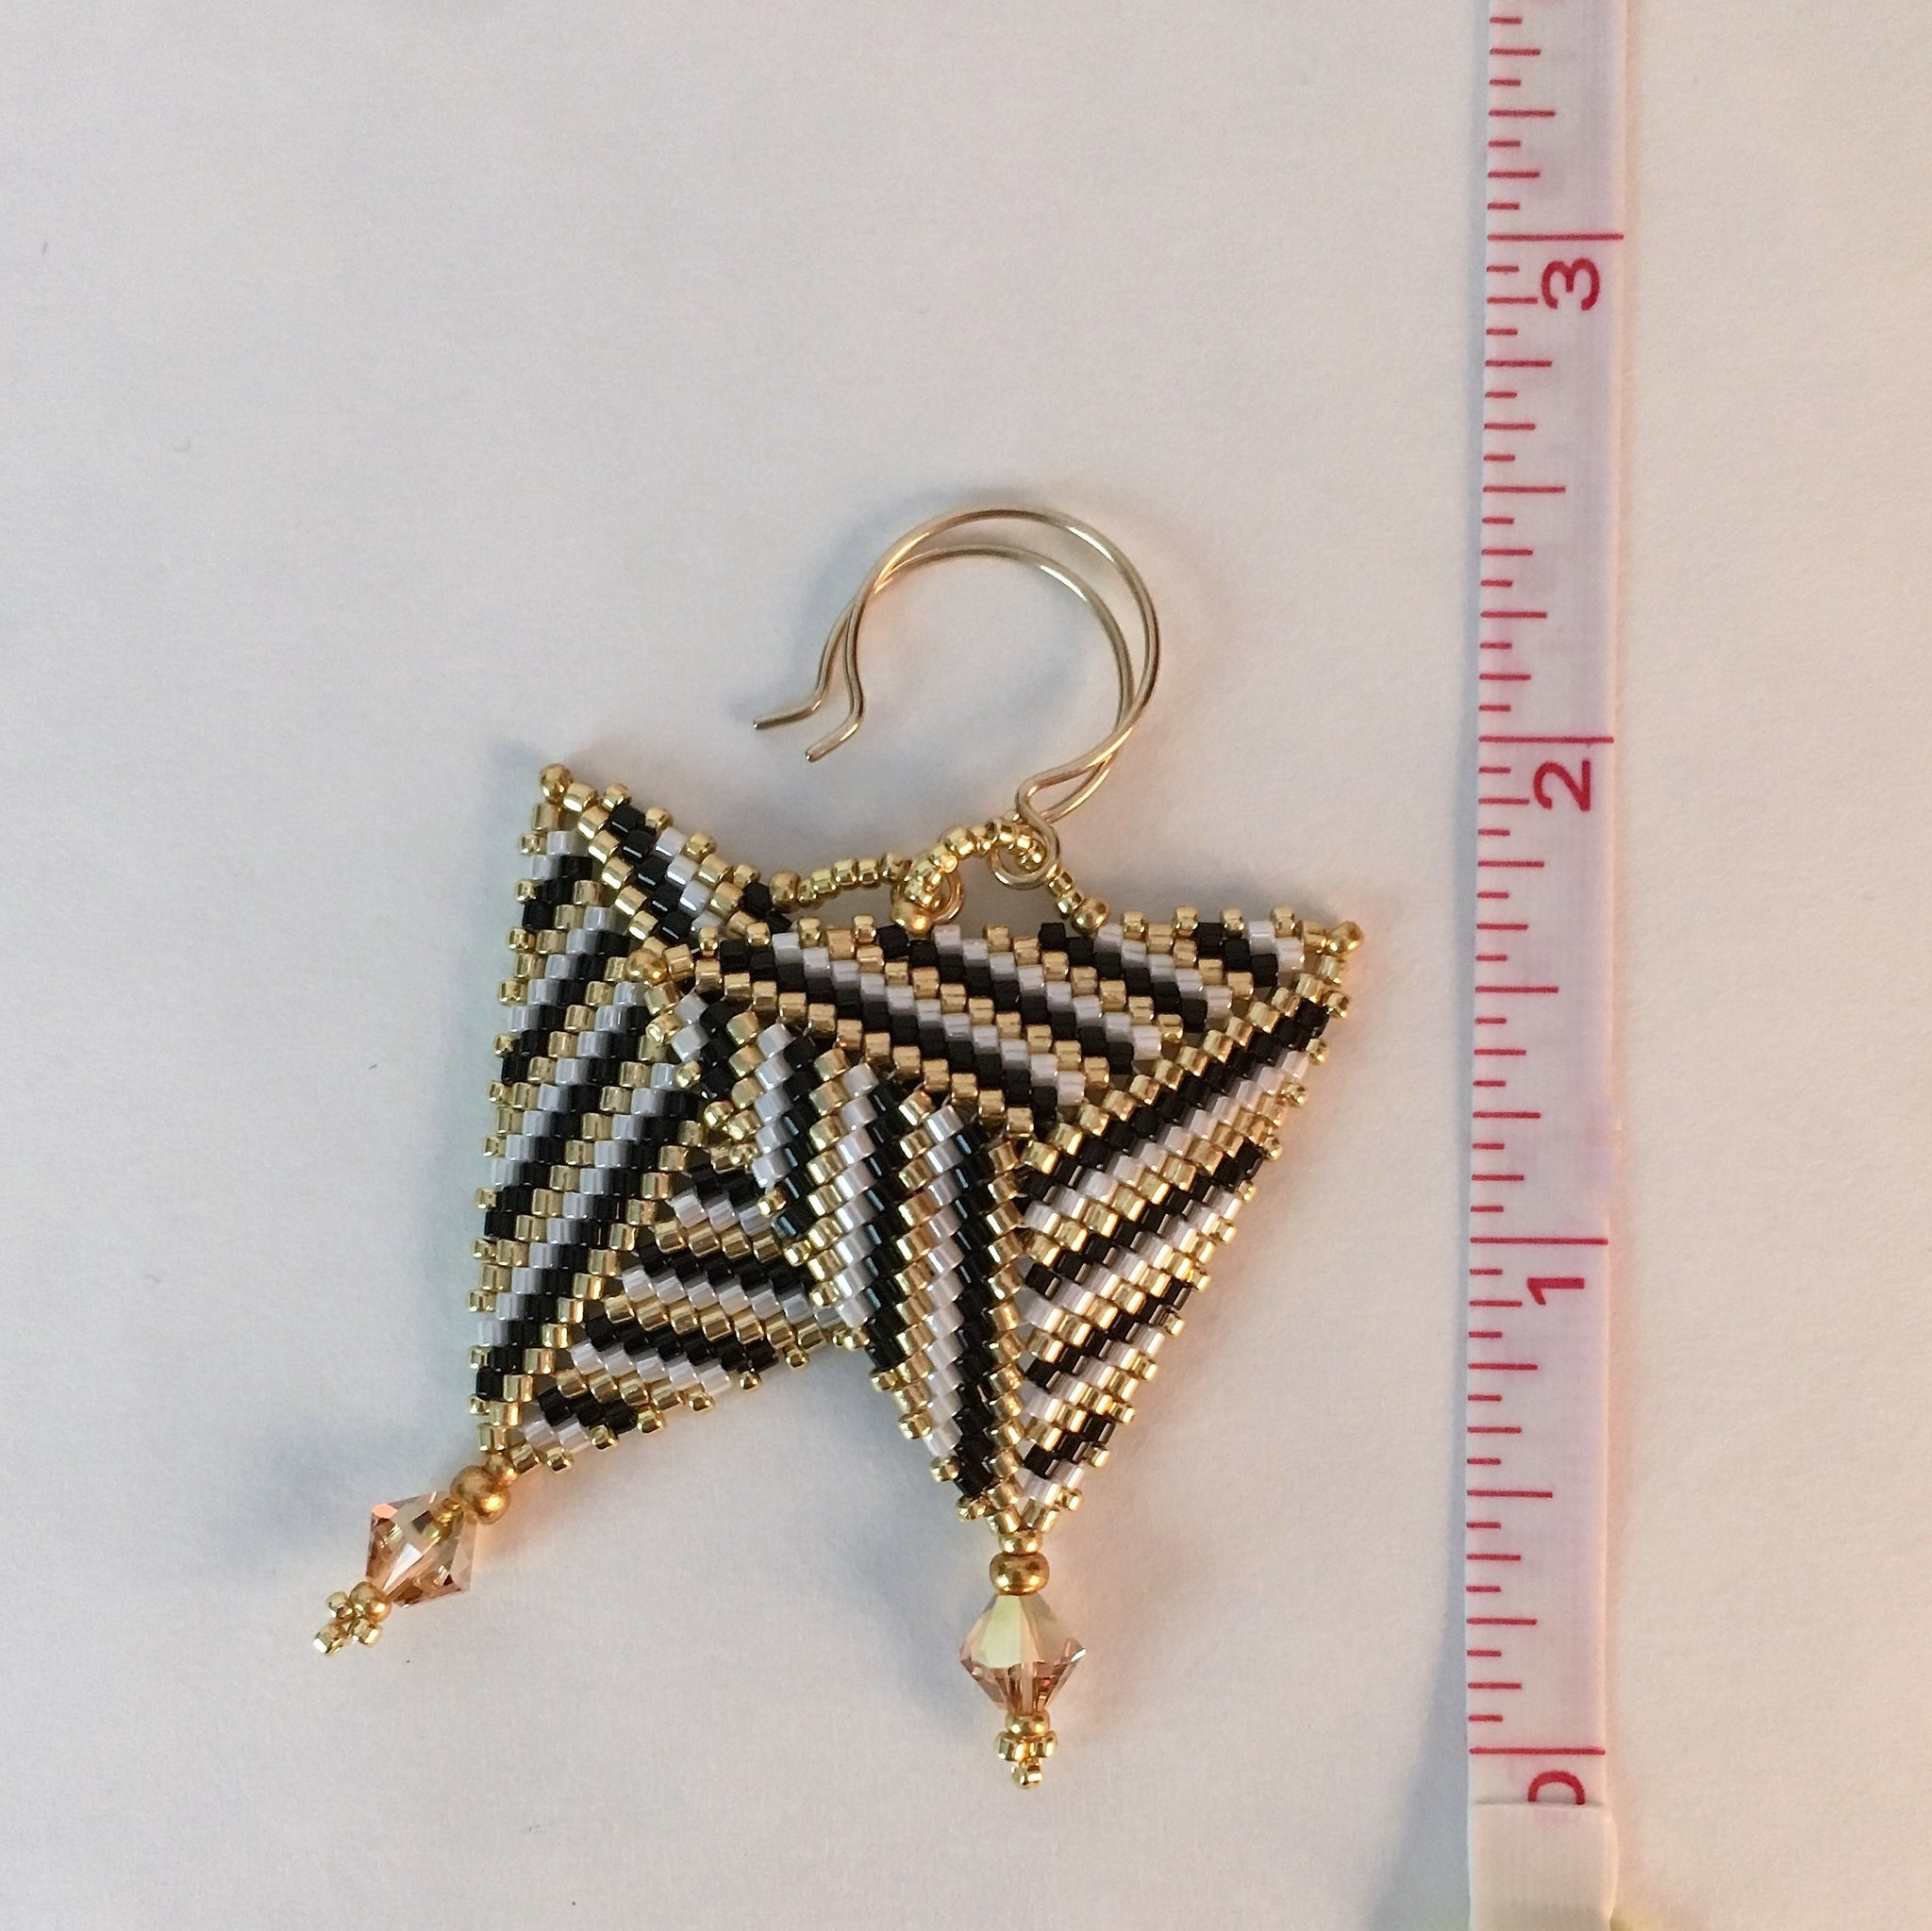 Contemporary Triangle Earrings in Gold, Black and White with Swarovski™ Crystals